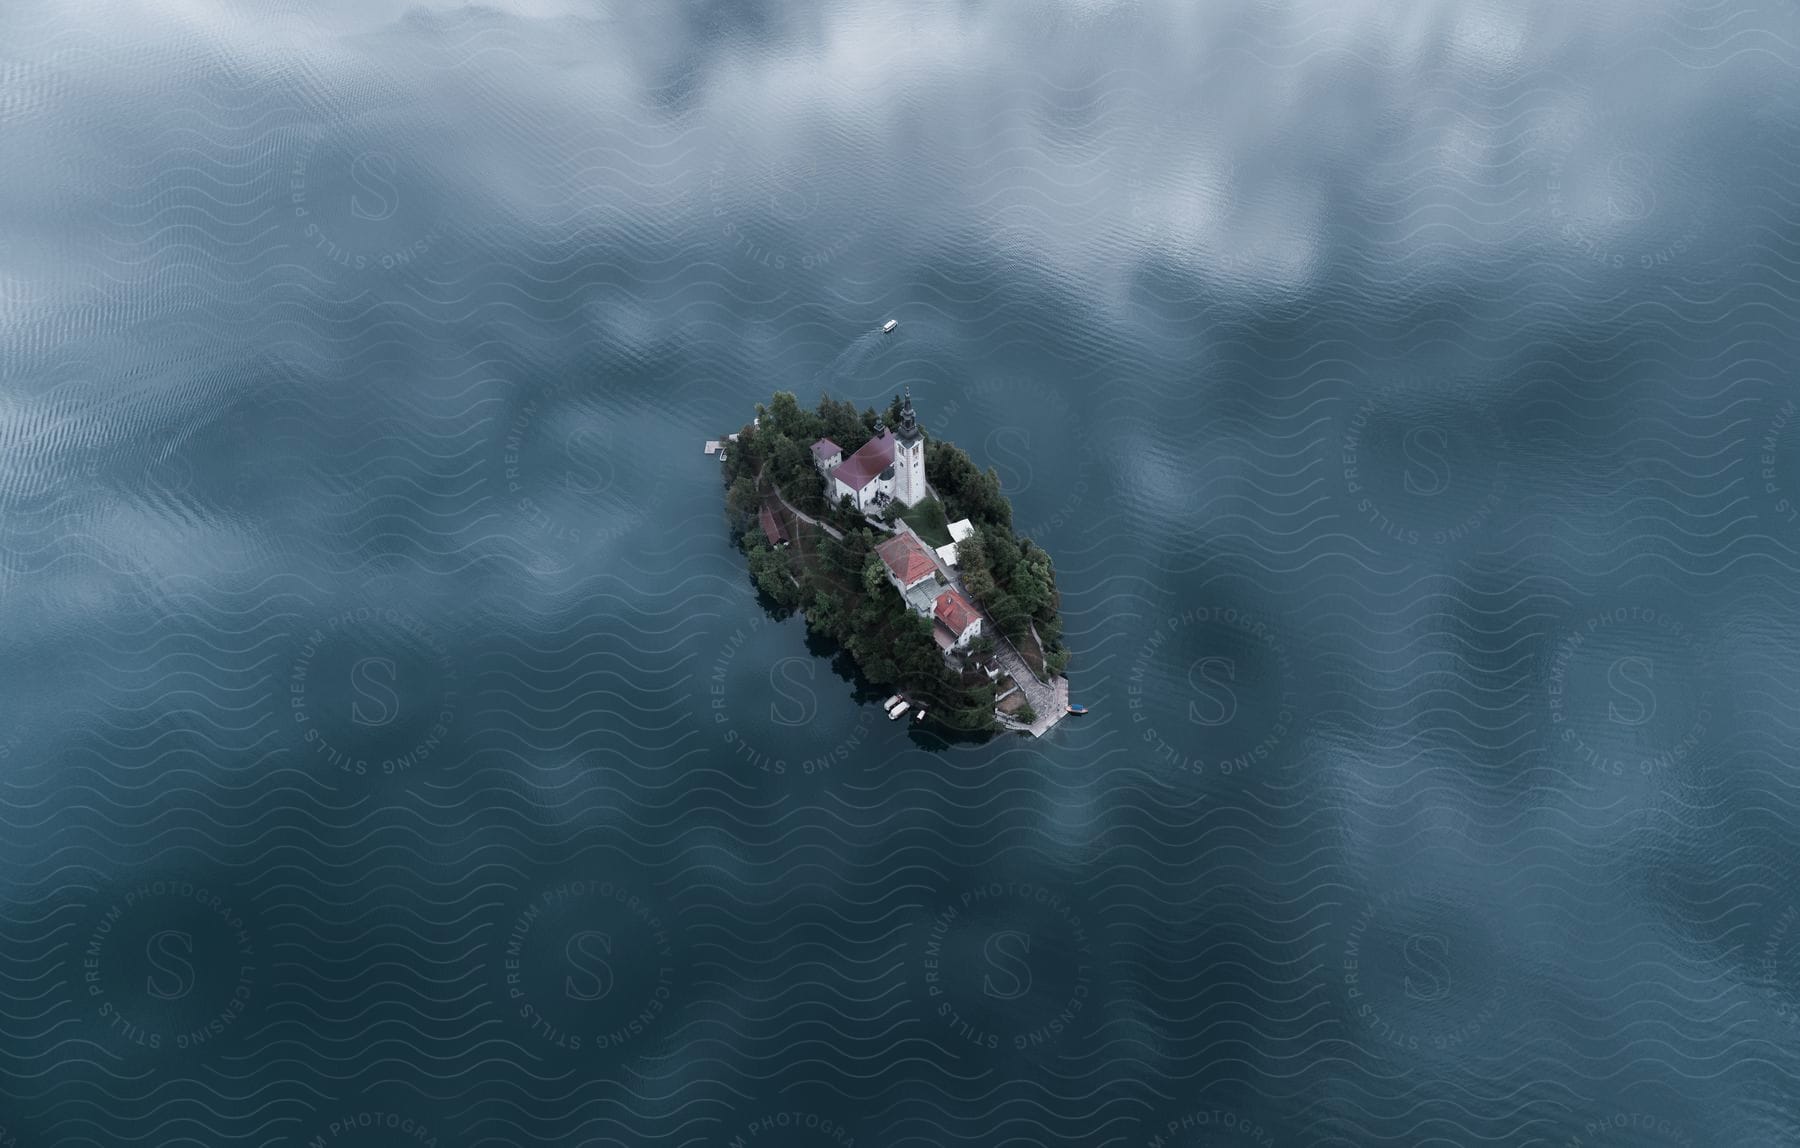 A small island village surrounded by water